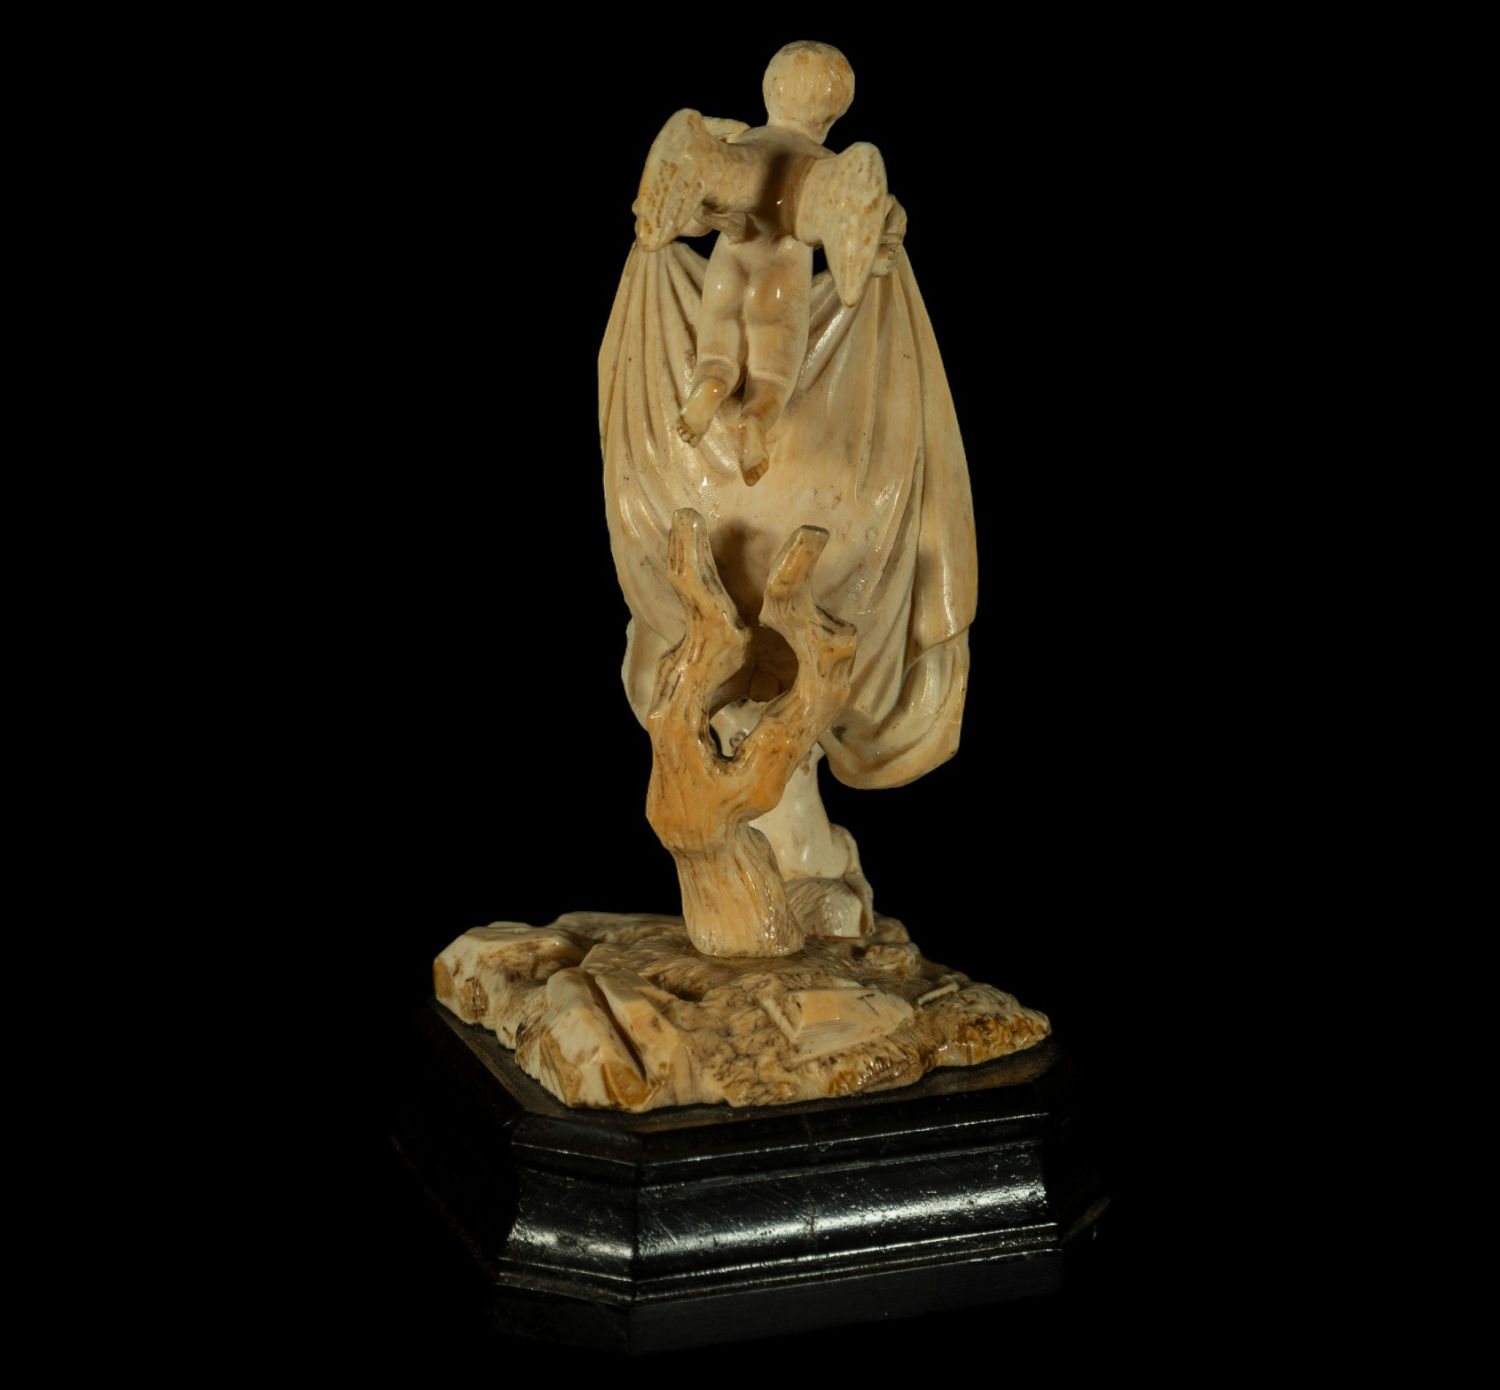 German School of the 17th century, Memento Mori or Vánitas in ebony and ivory sculptural group - Image 3 of 4